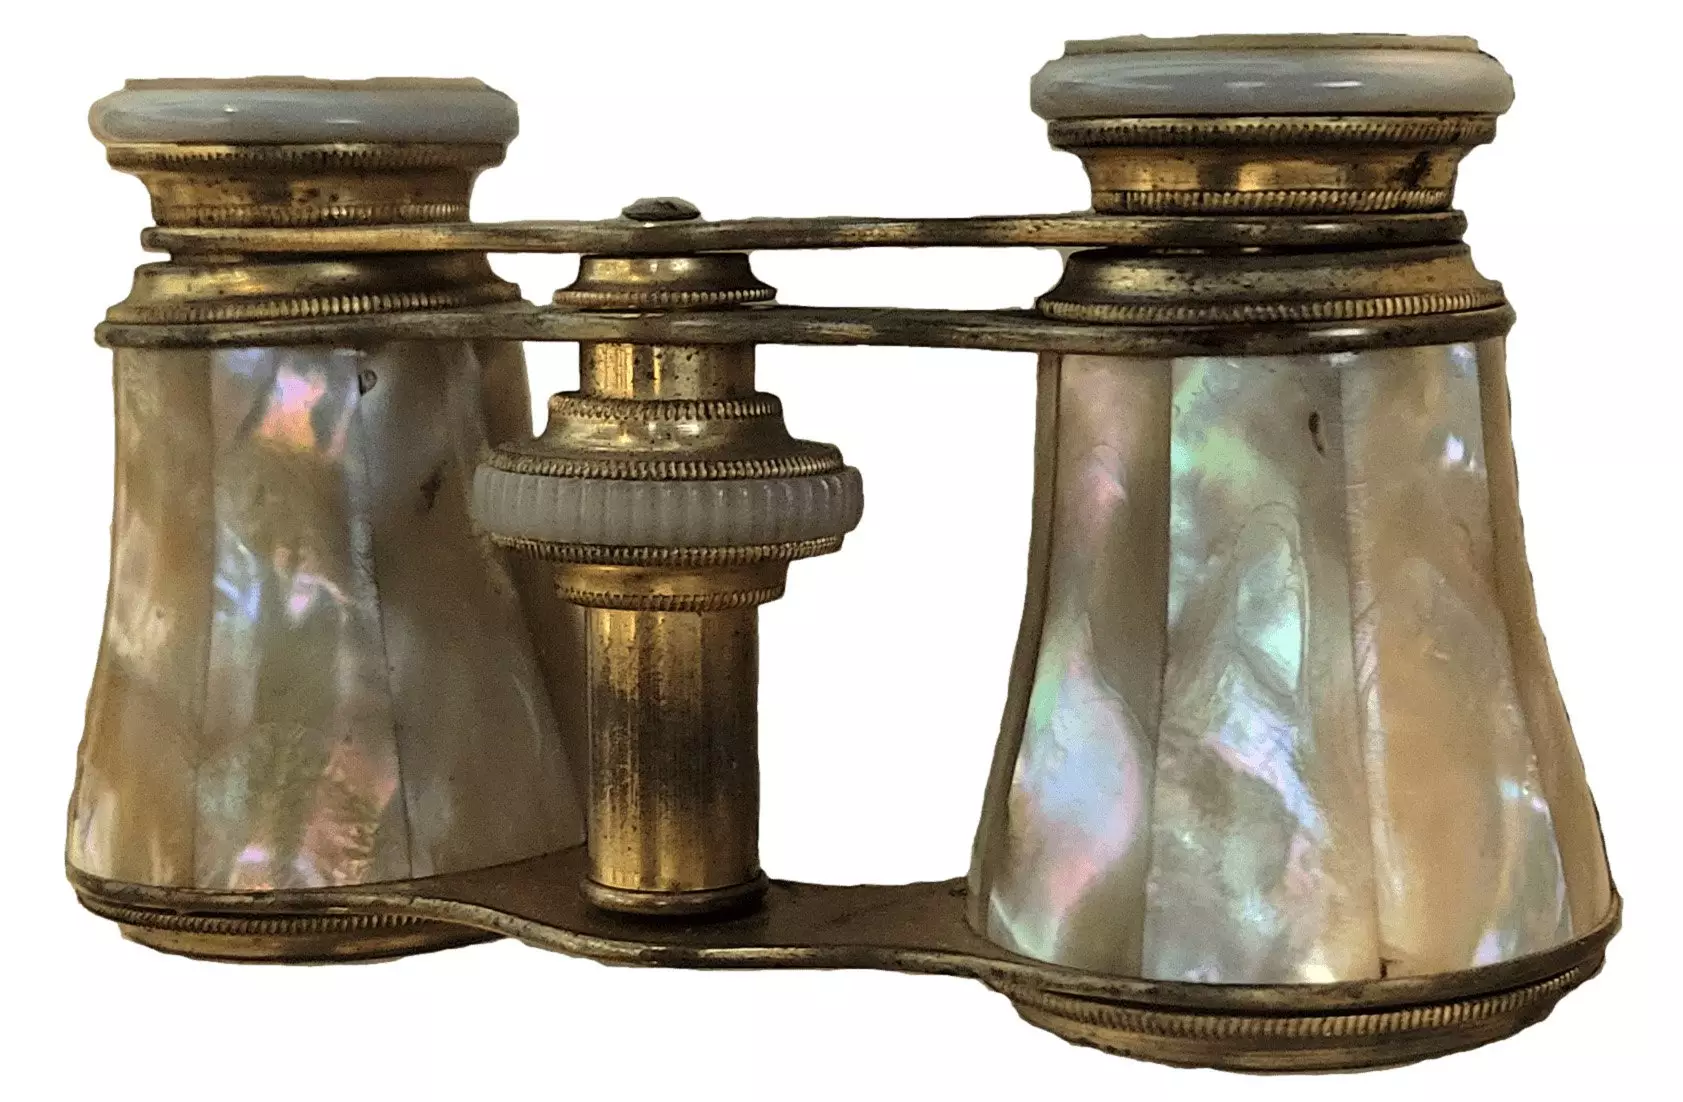 These are like small binoculars, and are covered entirely in mother-of-pearl inlay. Mother-of-pearl is mostly white but at different angles shows light hues of pink, green, and blue.